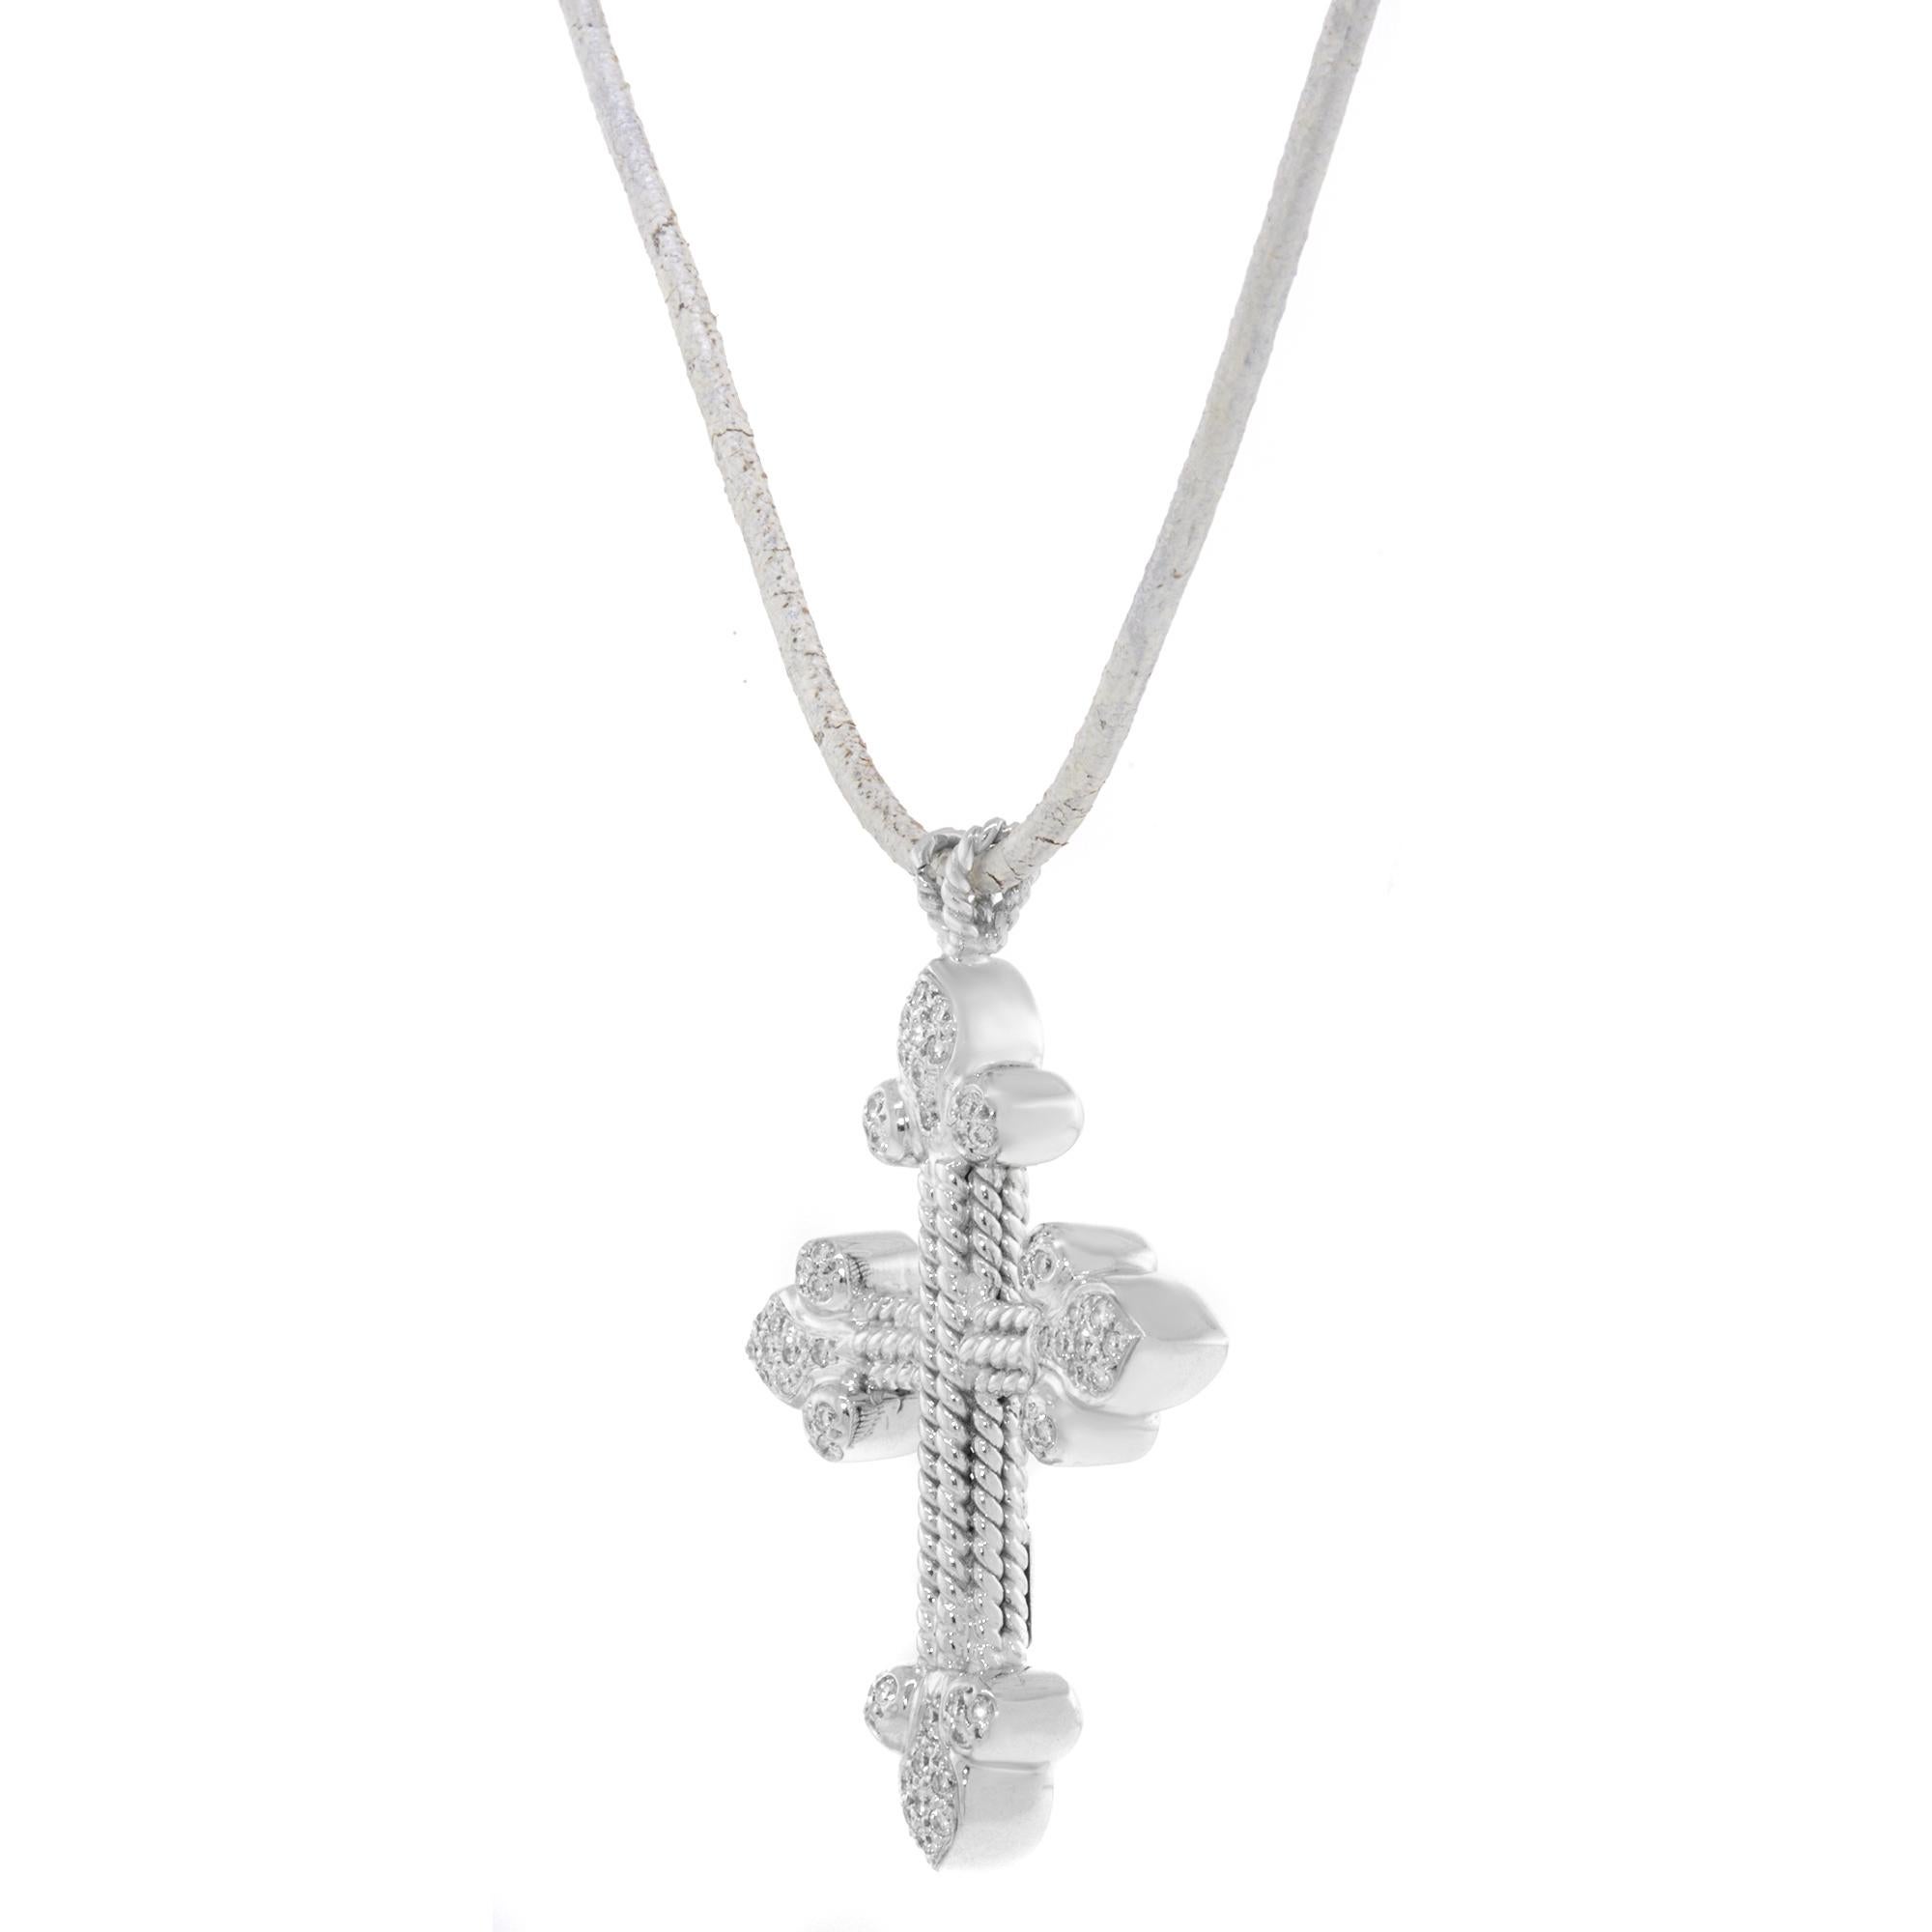 This beautiful cross necklace is crafted in 18k white gold and encrusted with 56 round cut diamonds. The length of the necklace is 41cm / 20cm. Total weight: 27 gms. The rope might have blemishes due to wear and age. The necklace comes with a gift